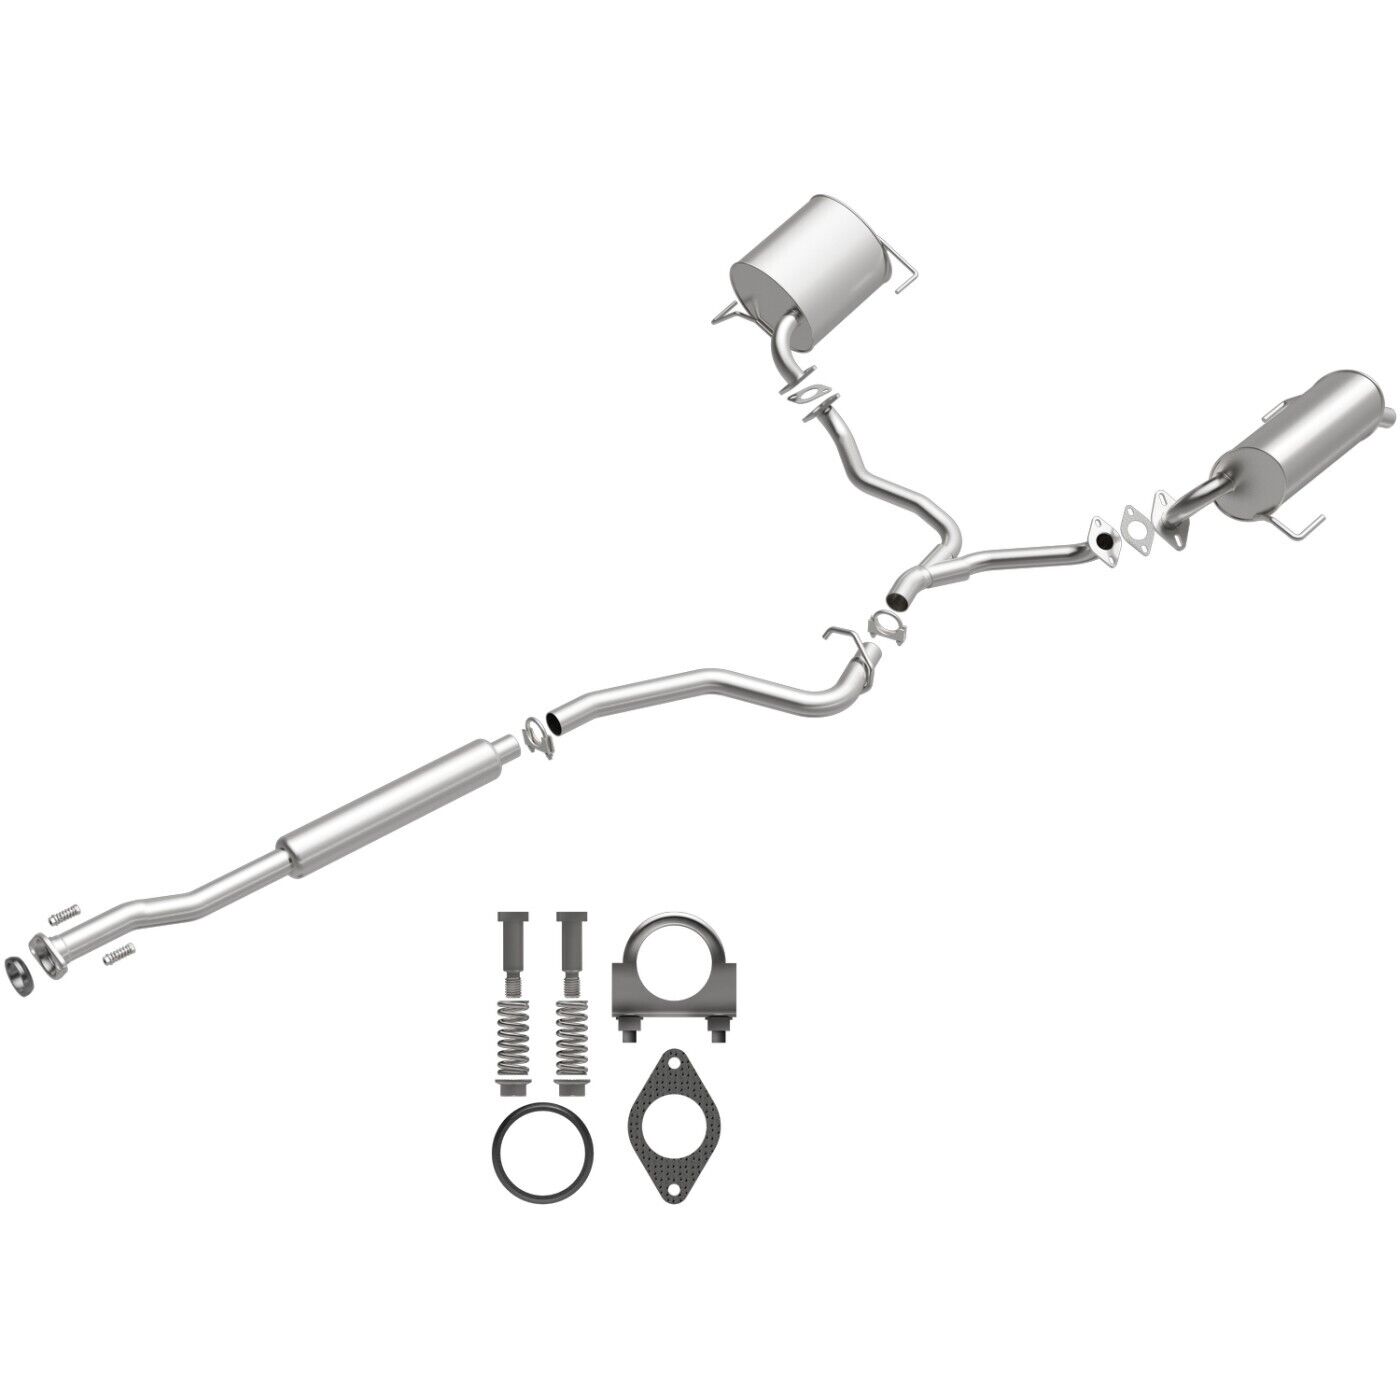 BRExhaust 106-0068 Exhaust Systems Rear for Subaru Outback 2006-2009